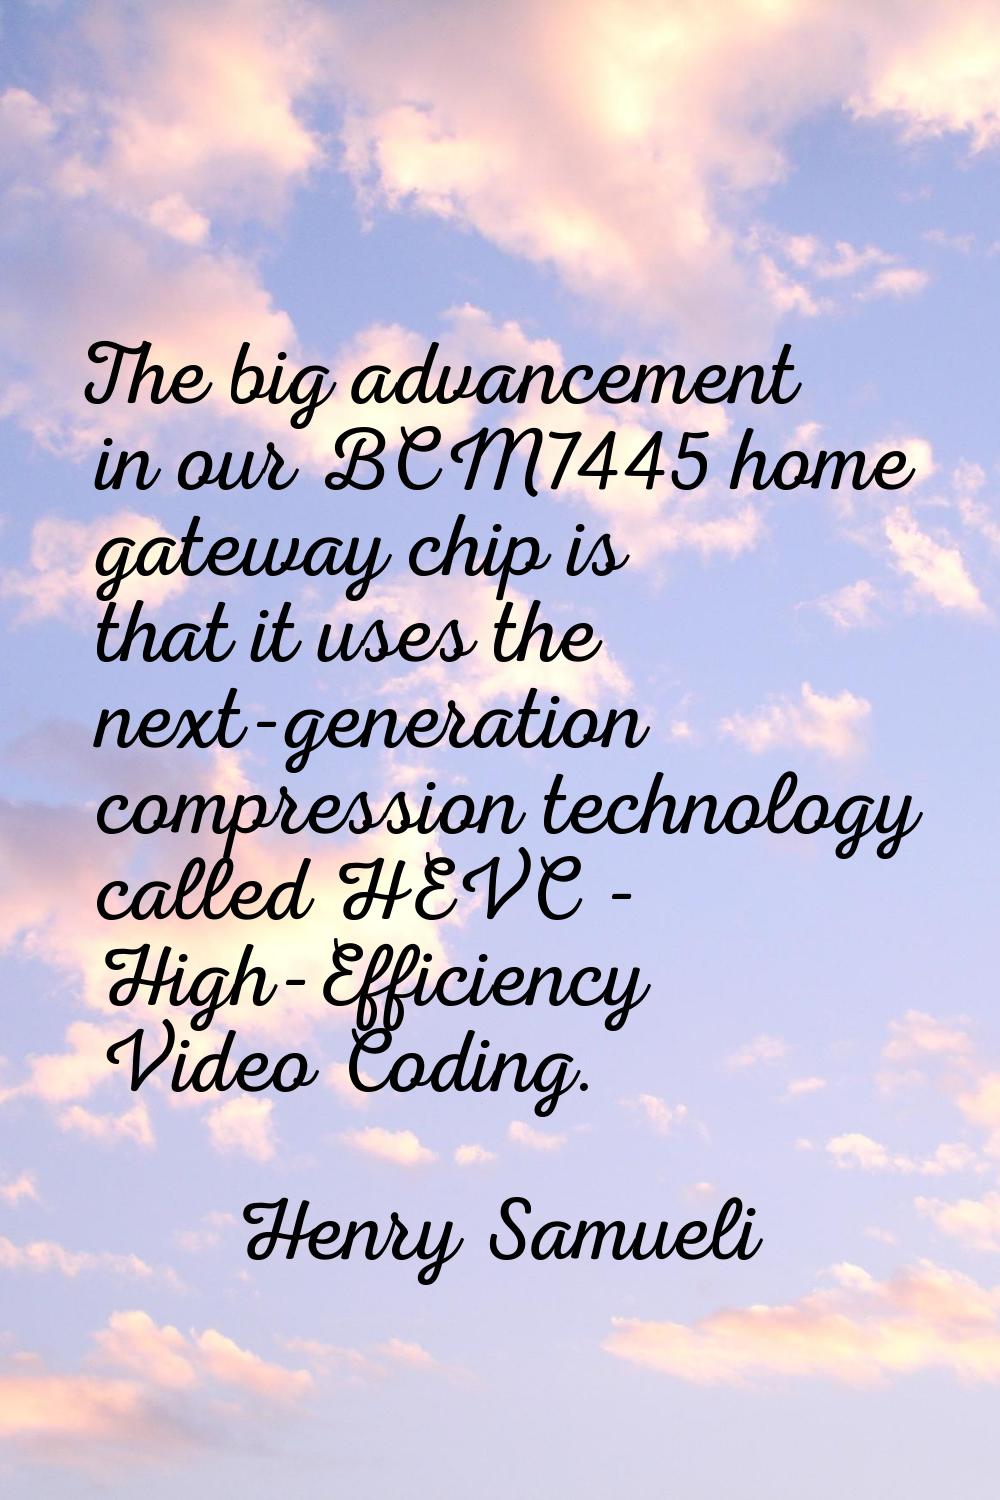 The big advancement in our BCM7445 home gateway chip is that it uses the next-generation compressio